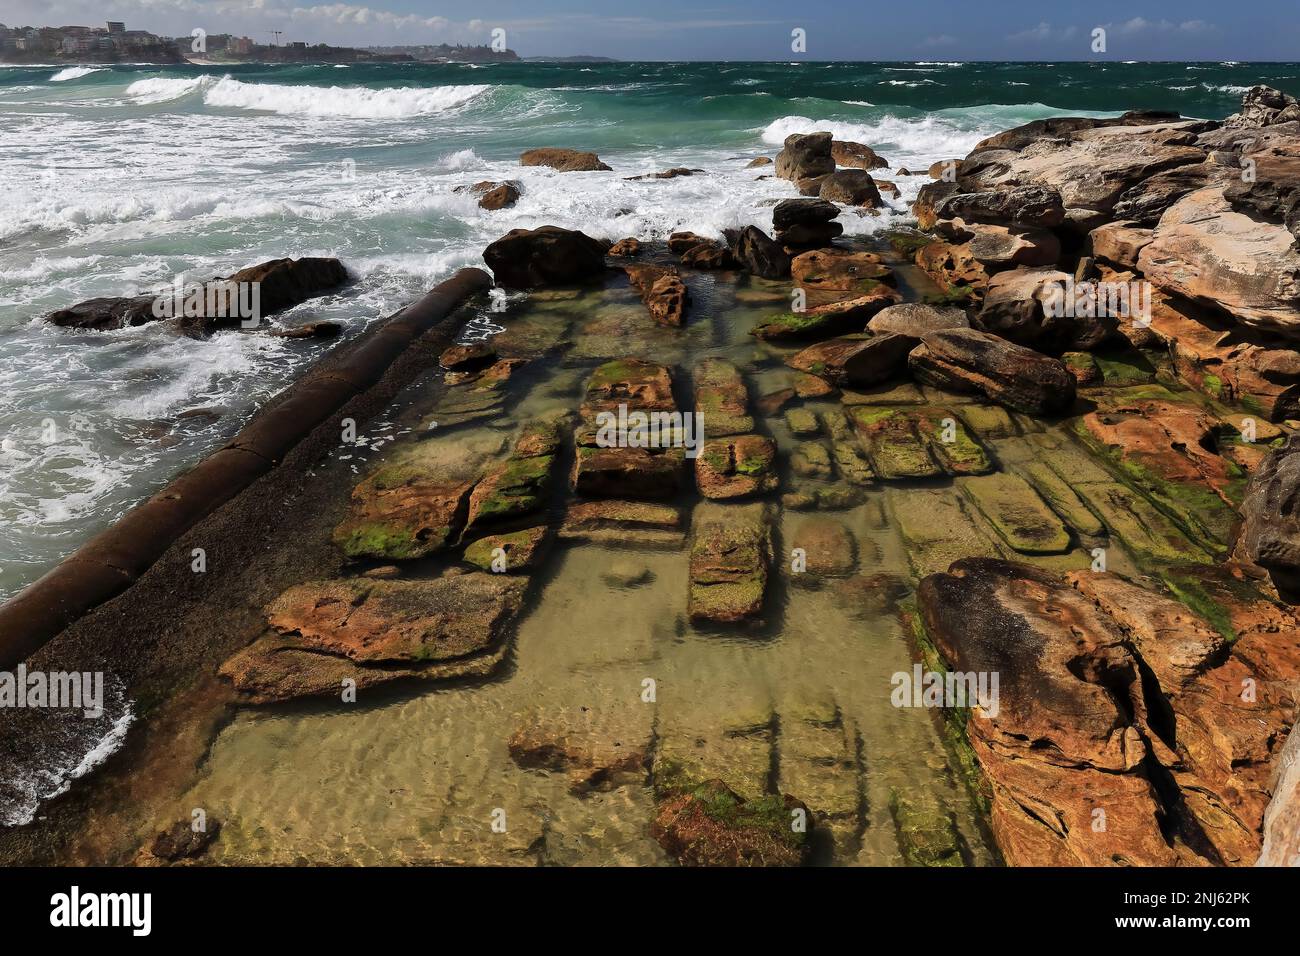 506 Strong waves break on the rocks next to Marine Parade in Manly suburb. Sydney-Australia. Stock Photo